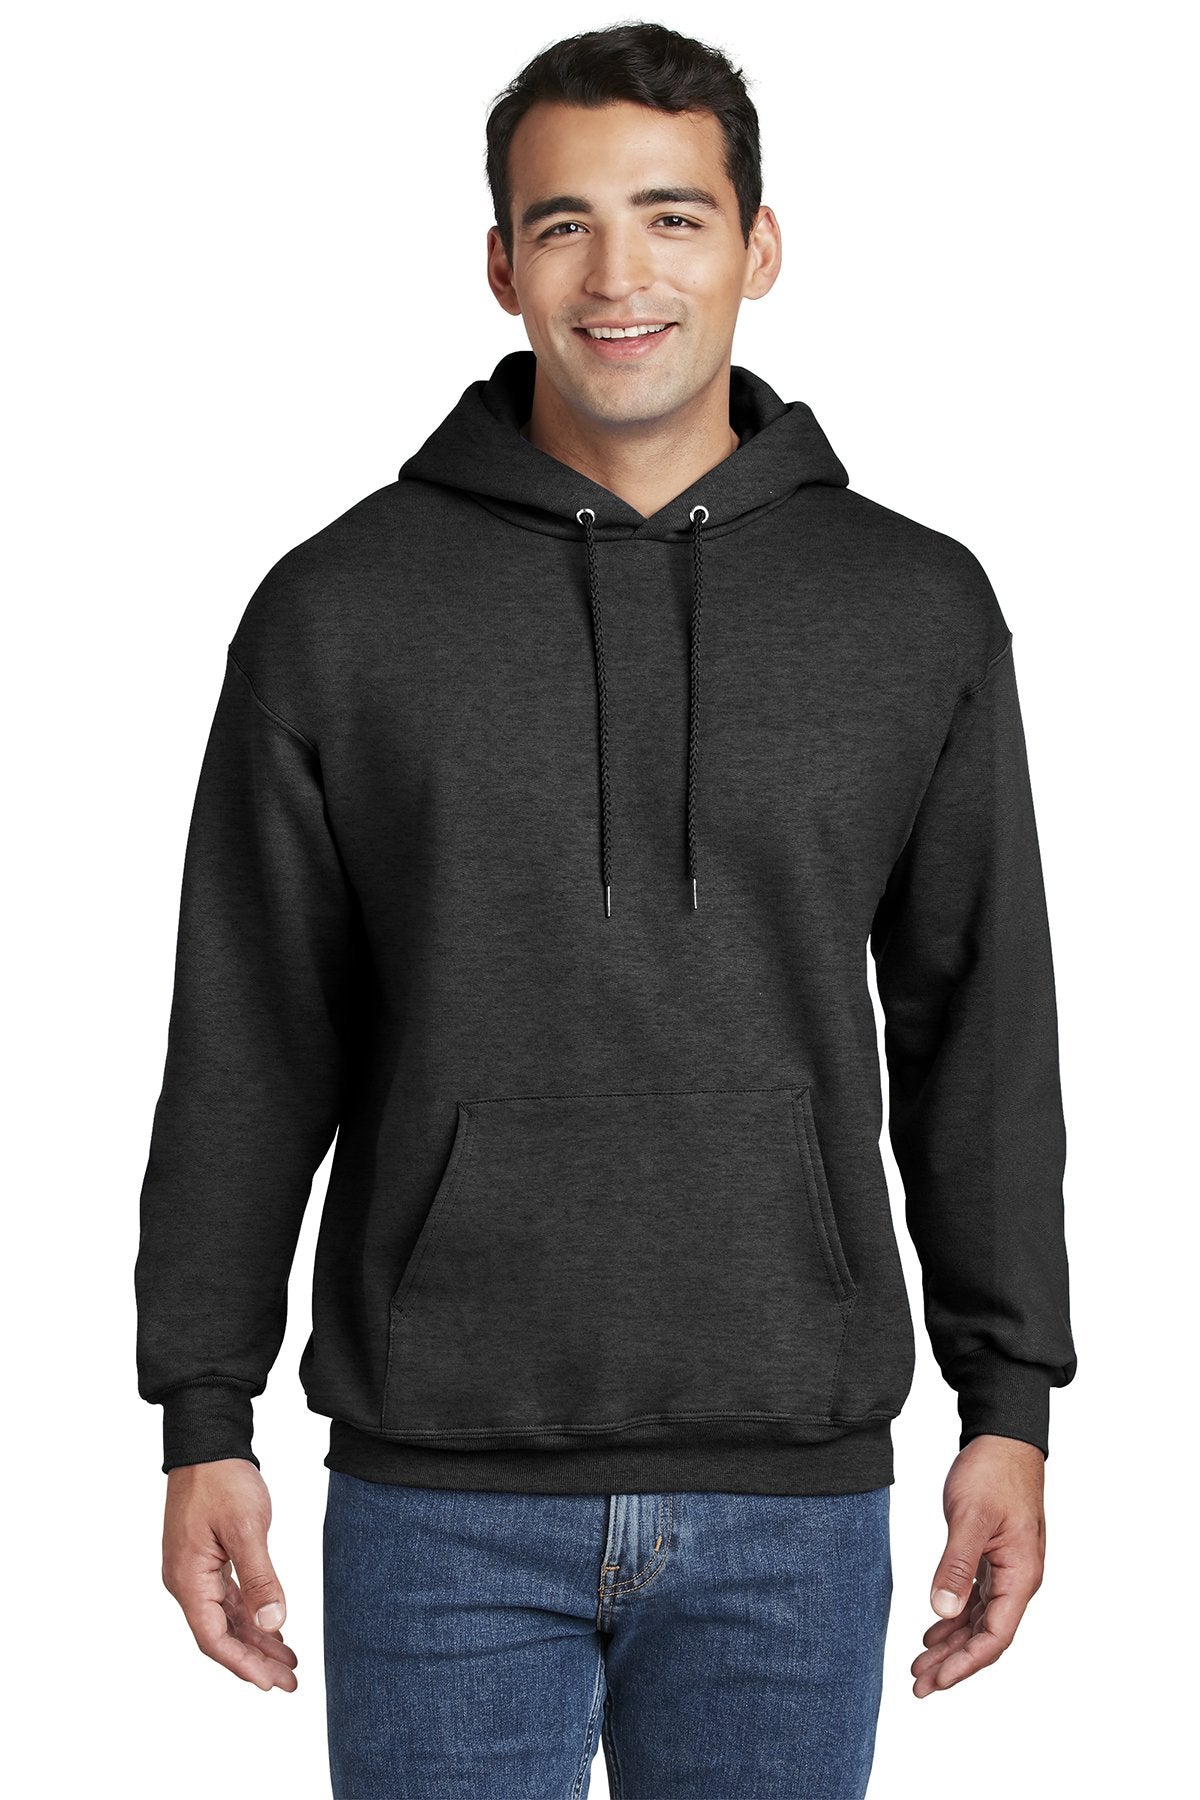 Hanes Ultimate Cotton Pullover Hooded Sweatshirt in Charcoal Heather ...